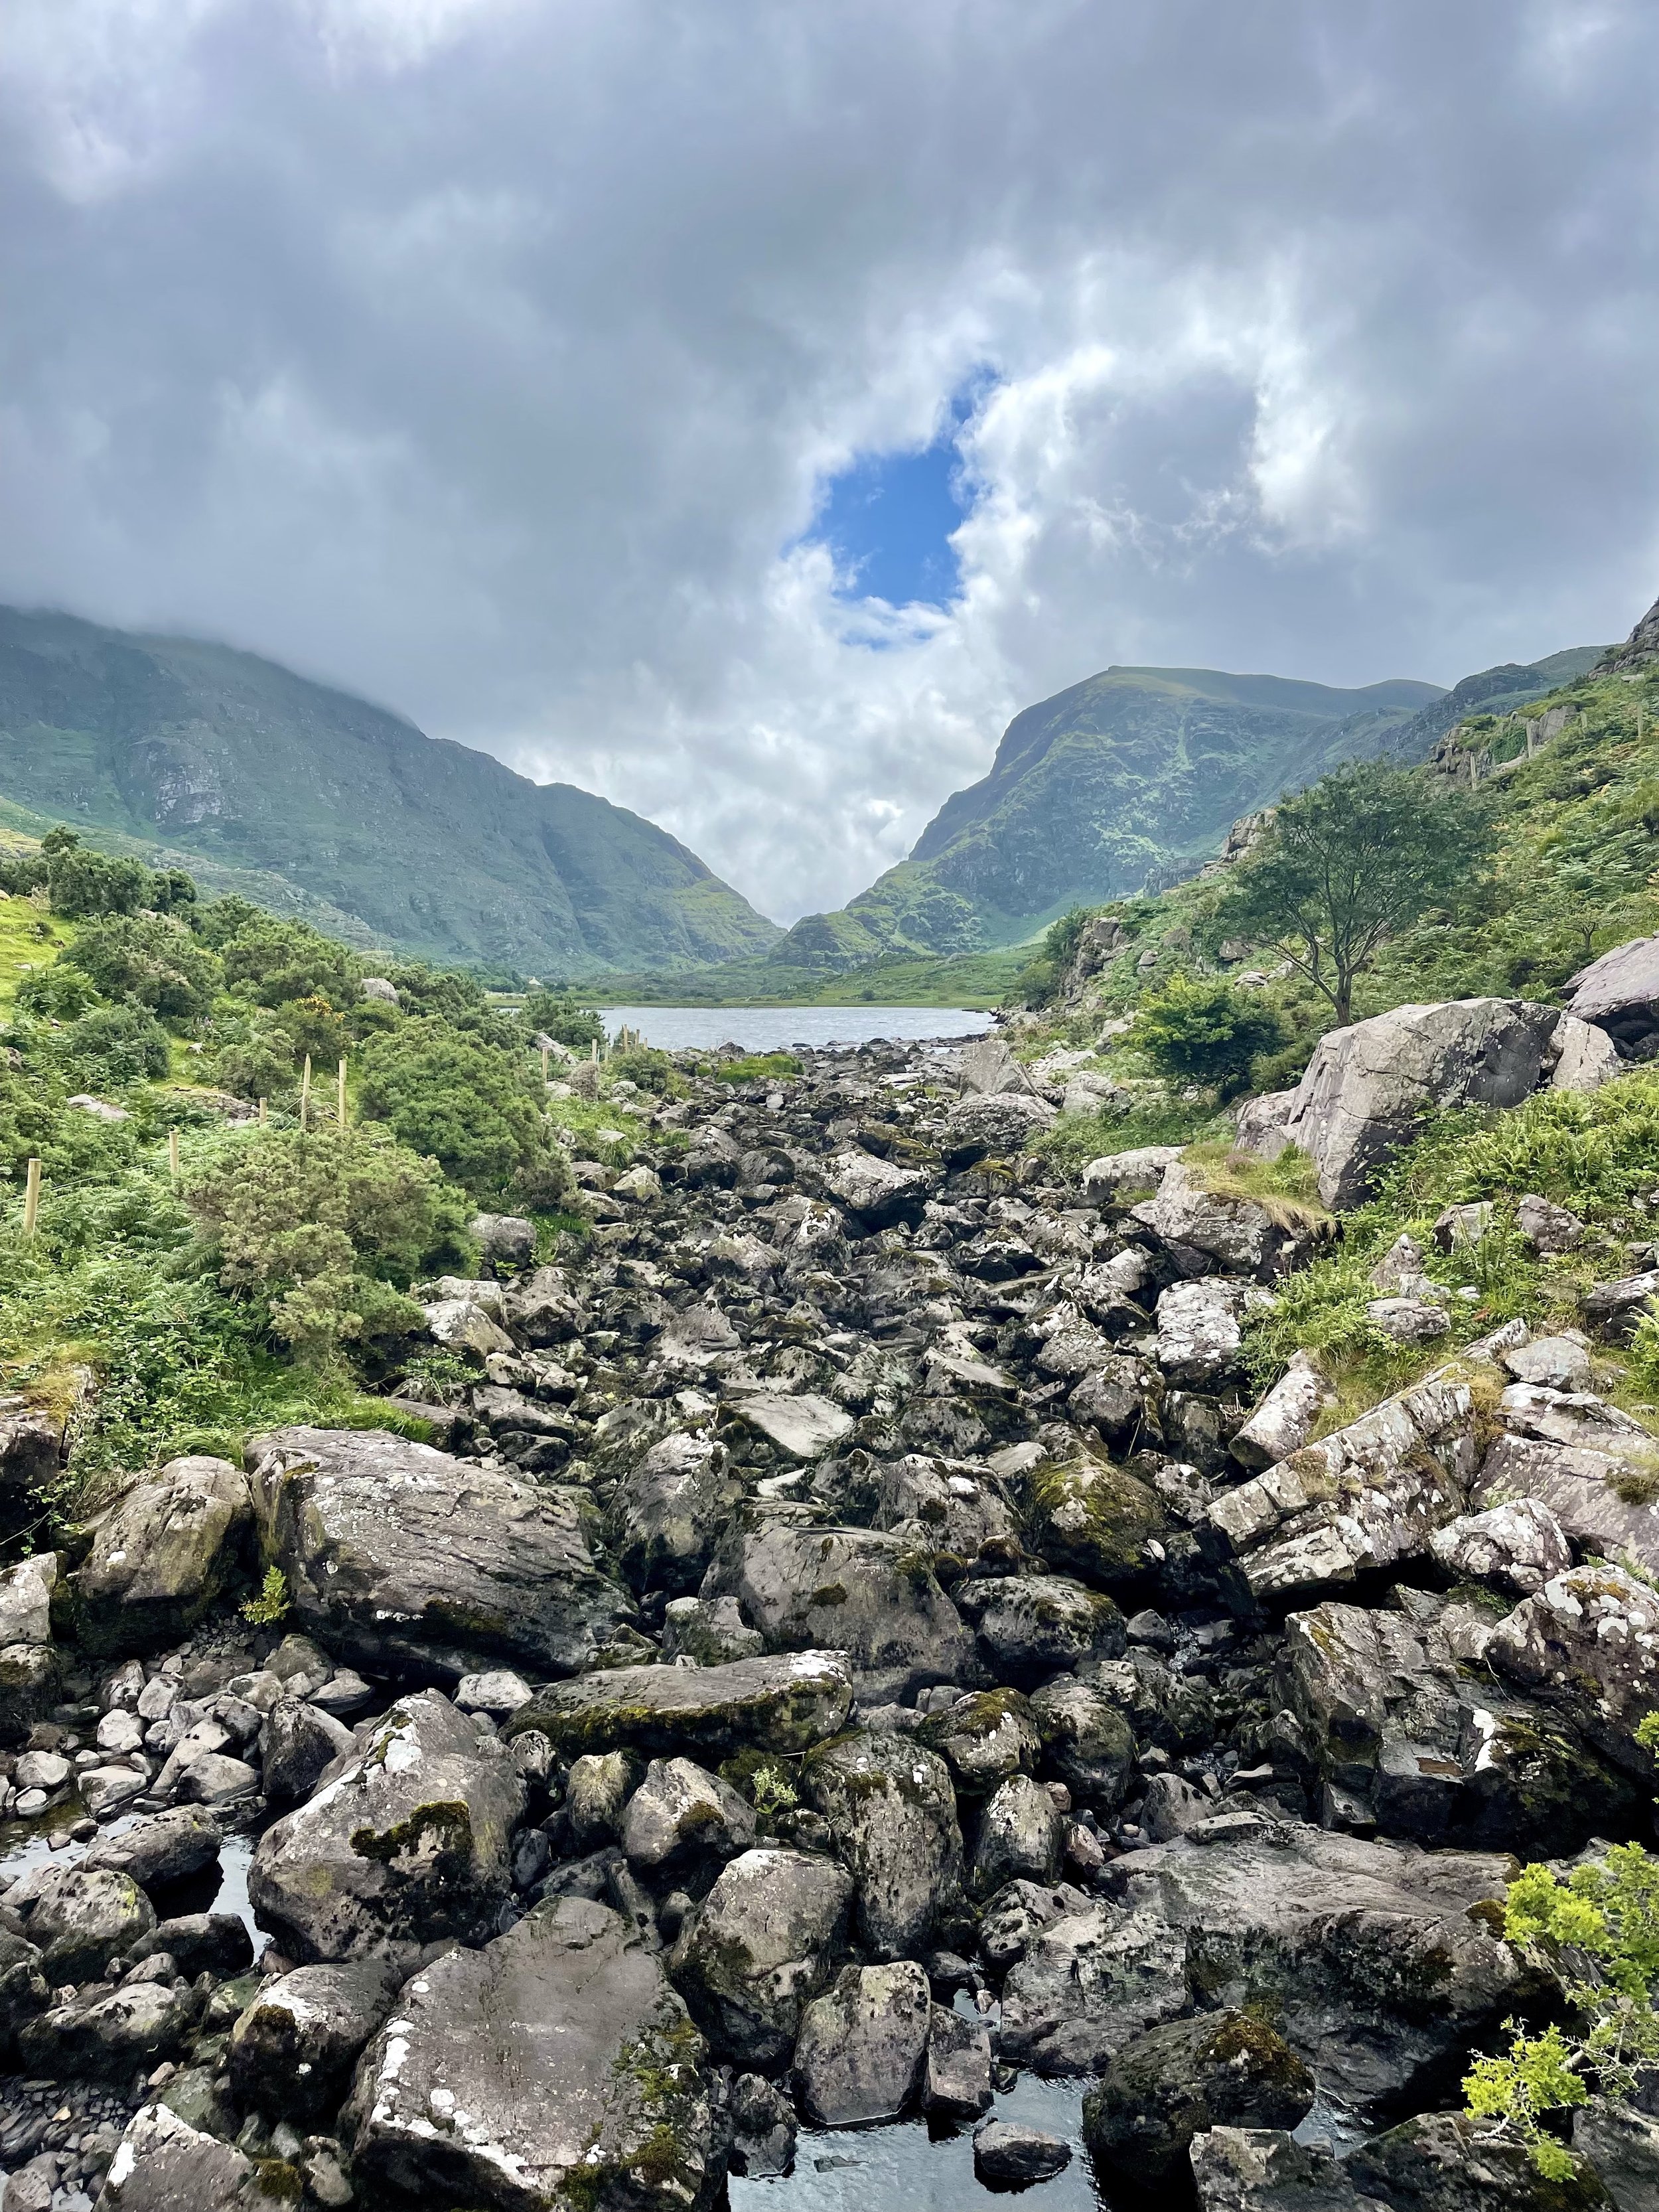 There are so many things to do in Killarney, Ireland. In this Killarney travel guide, I’ll show you the best things to do in Killarney and where to find the most spectacular scenery. There is a long list of things to do below that will suit every Kil